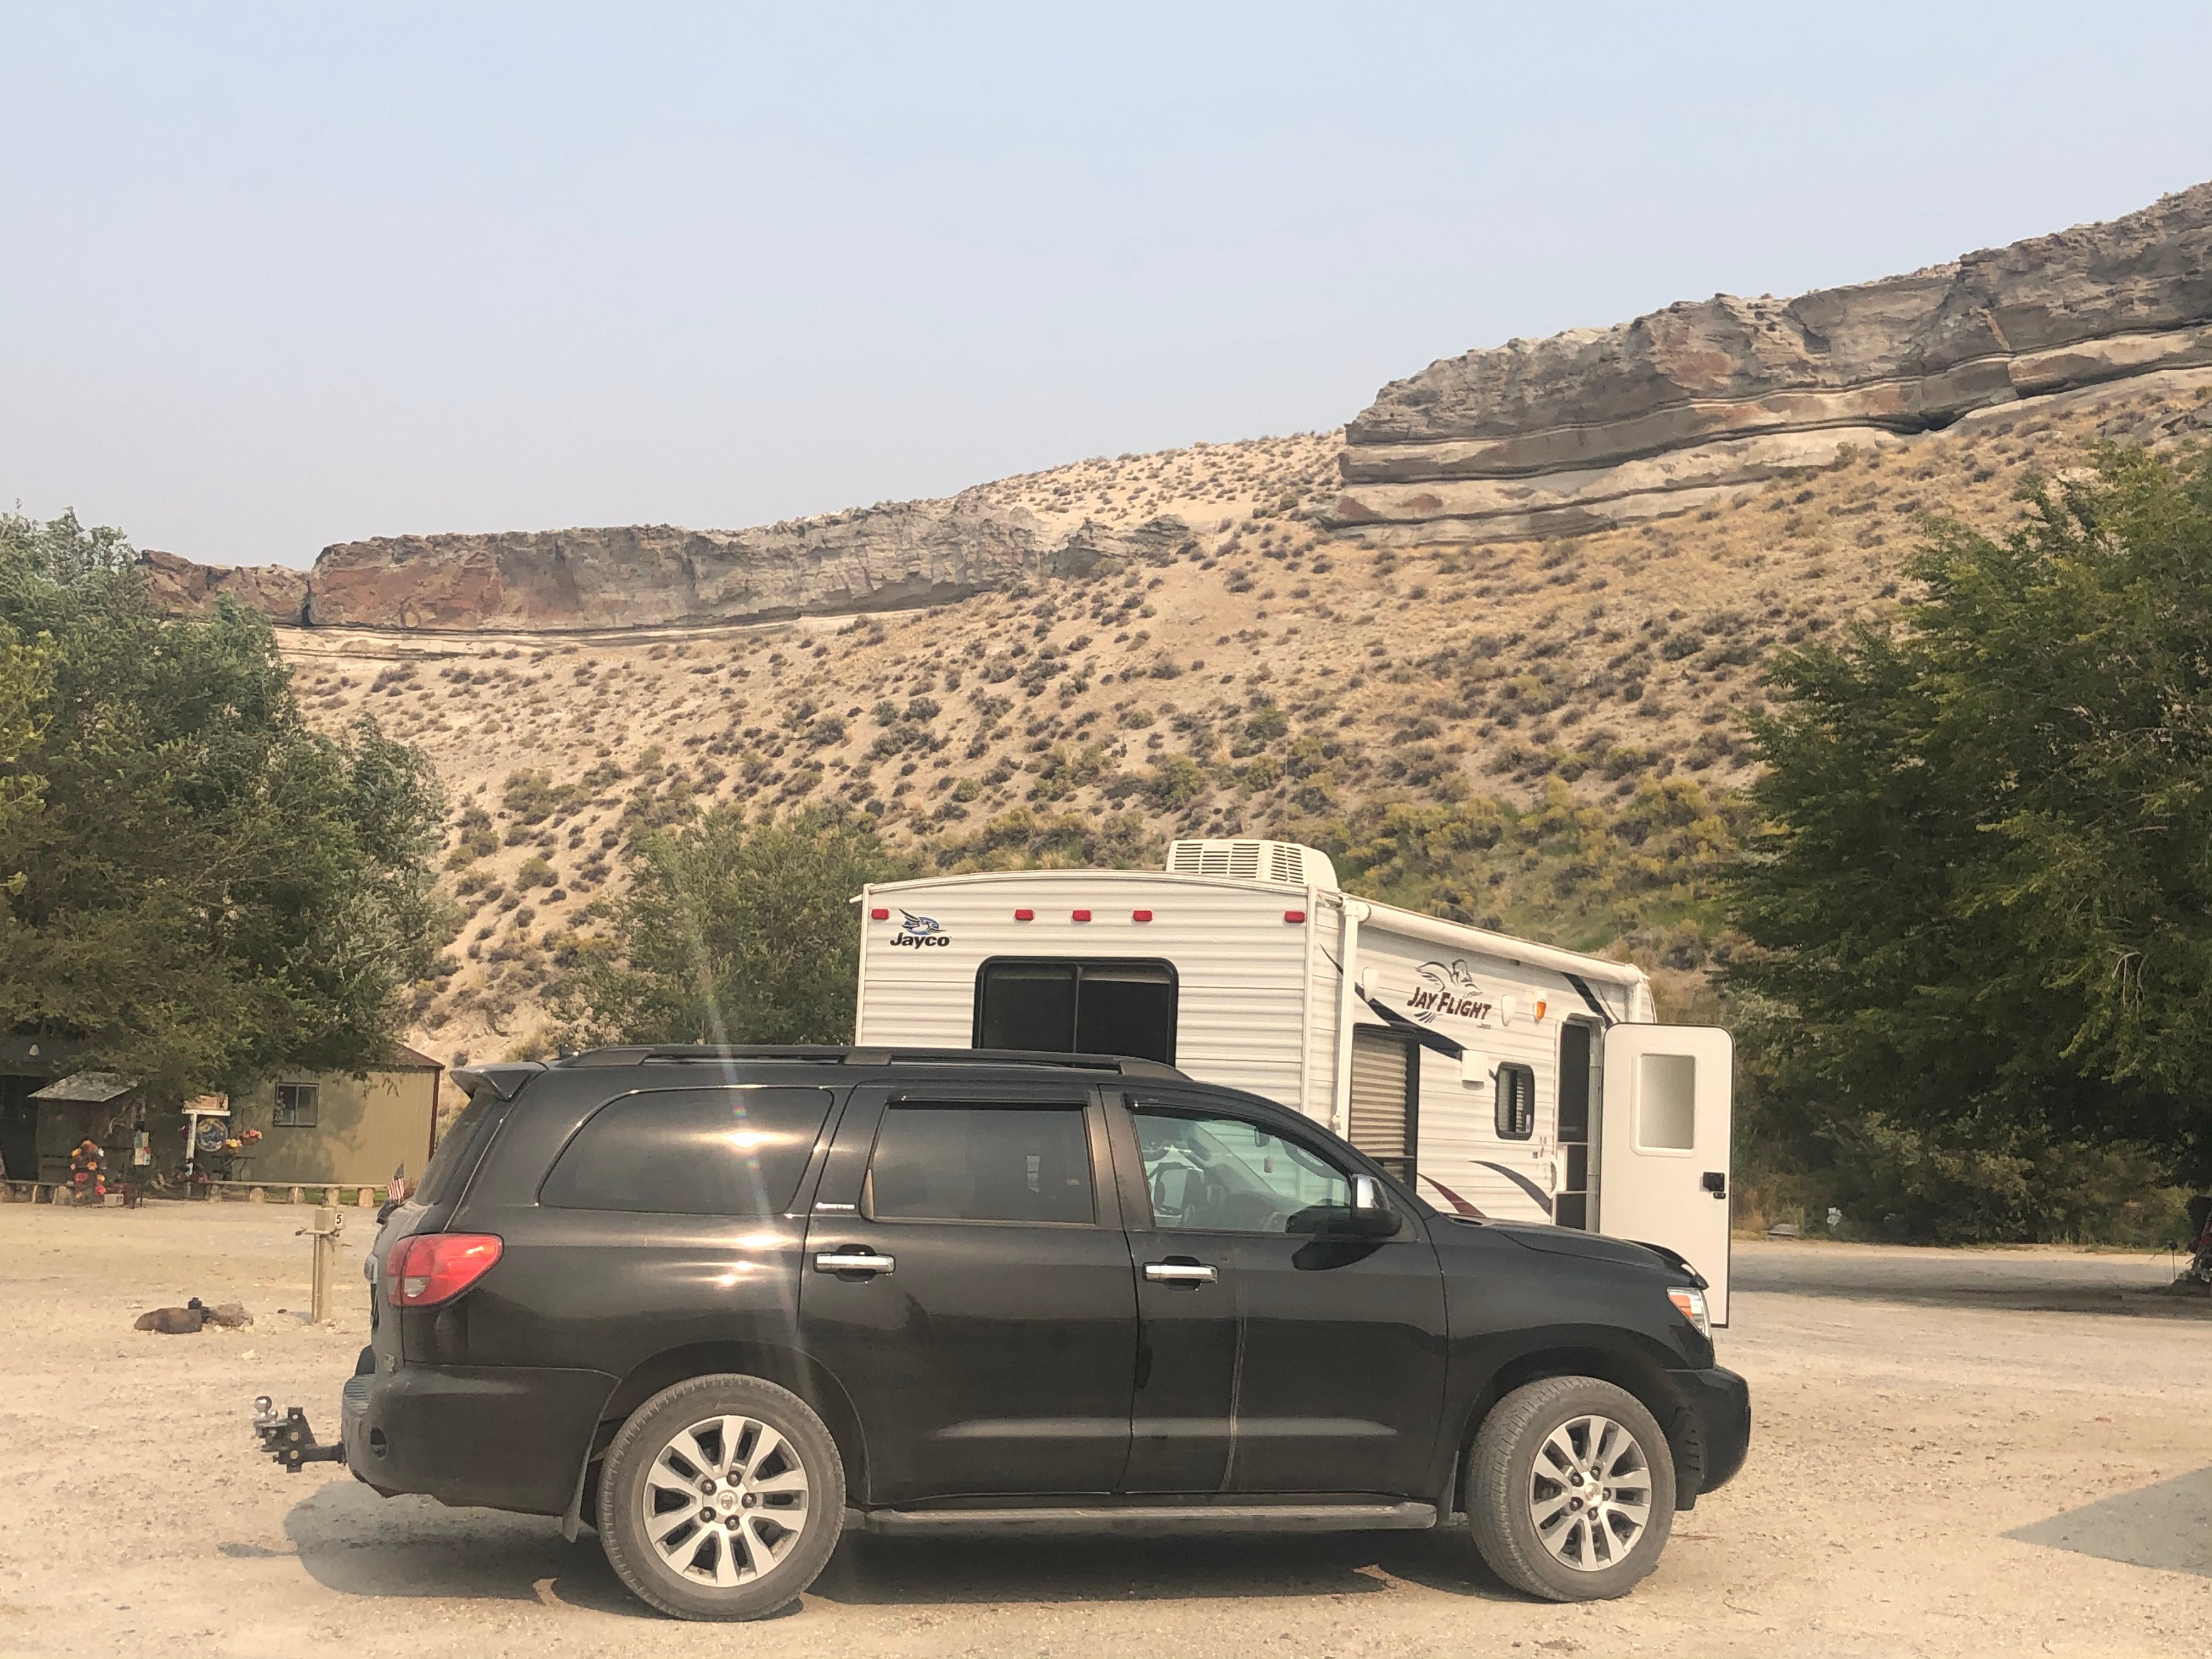 Camper submitted image from Royal Peacock opal mine - 3